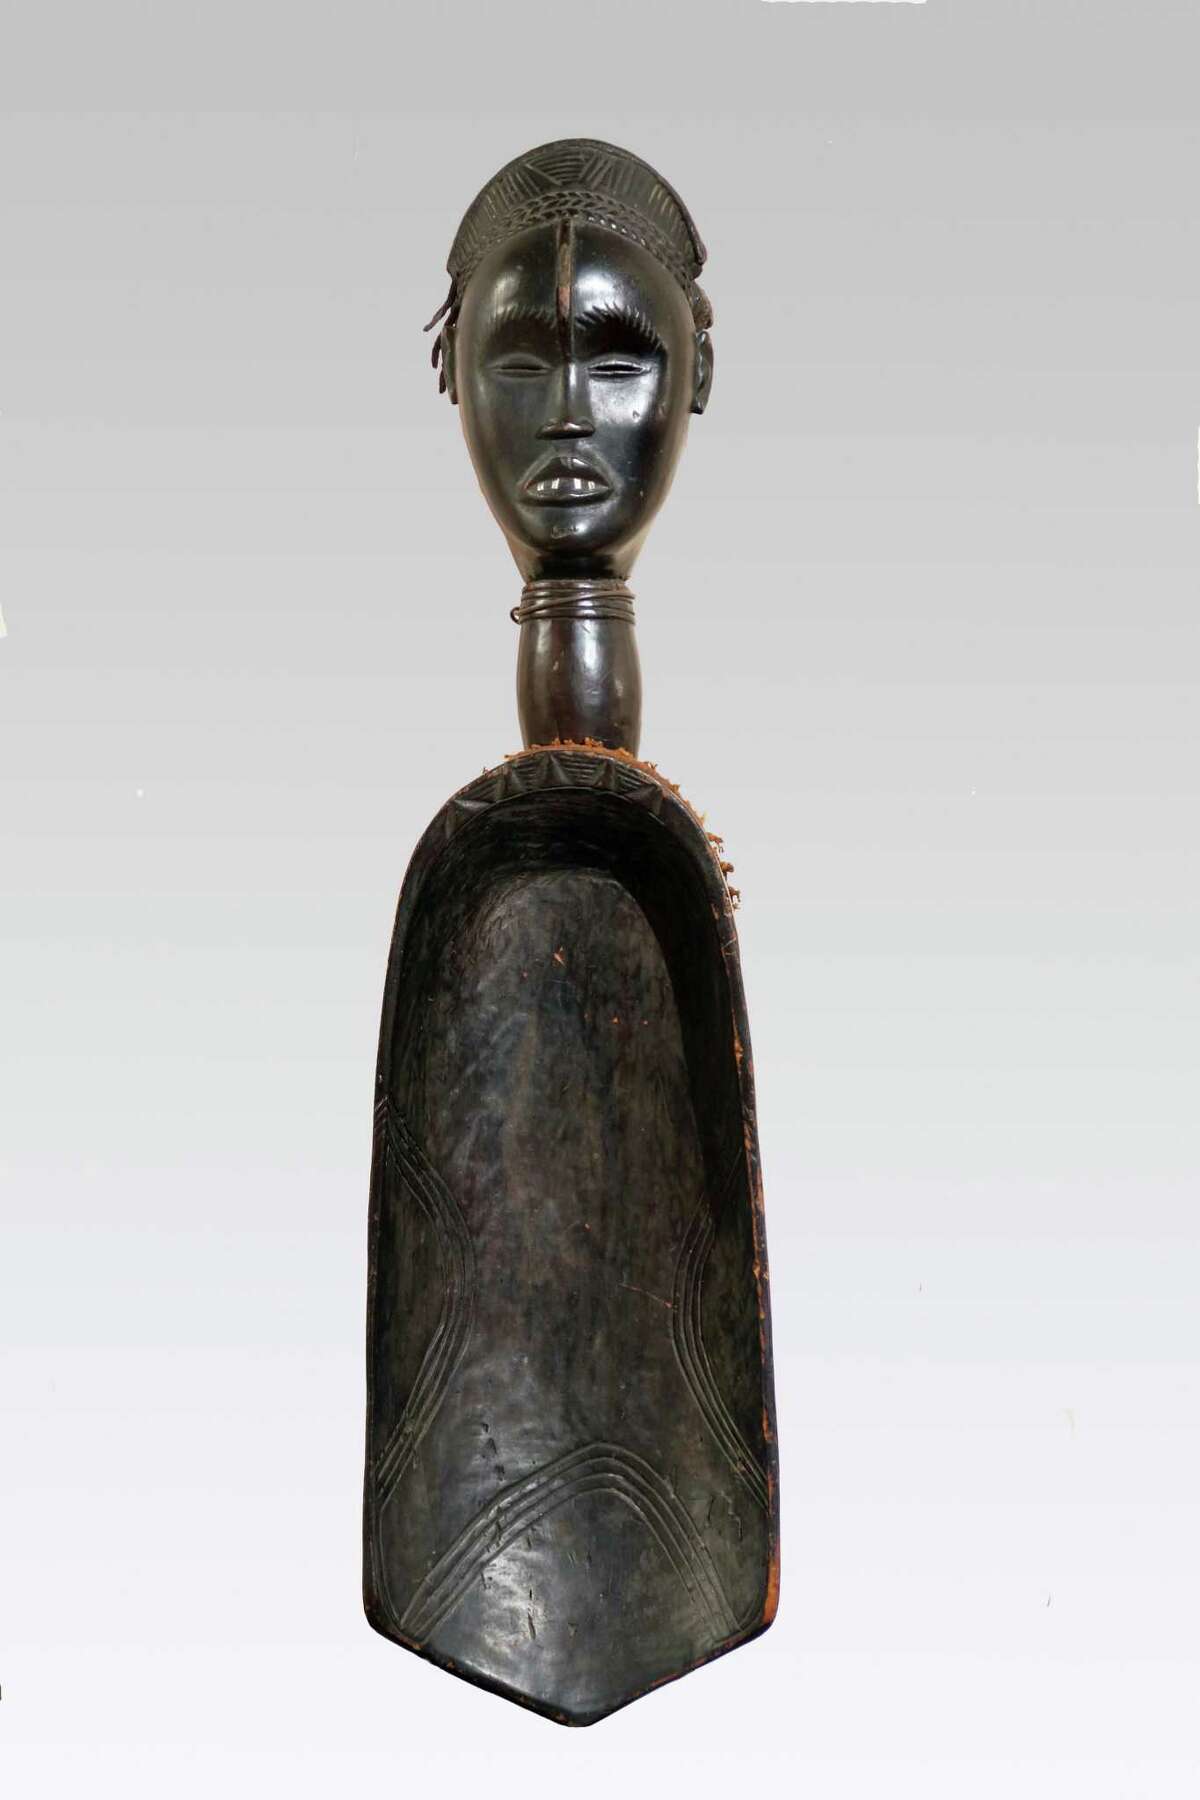 A ceremonial spoon or ladle carved by the artist Zlan eventually made its way to the Karob Collection in Boston.